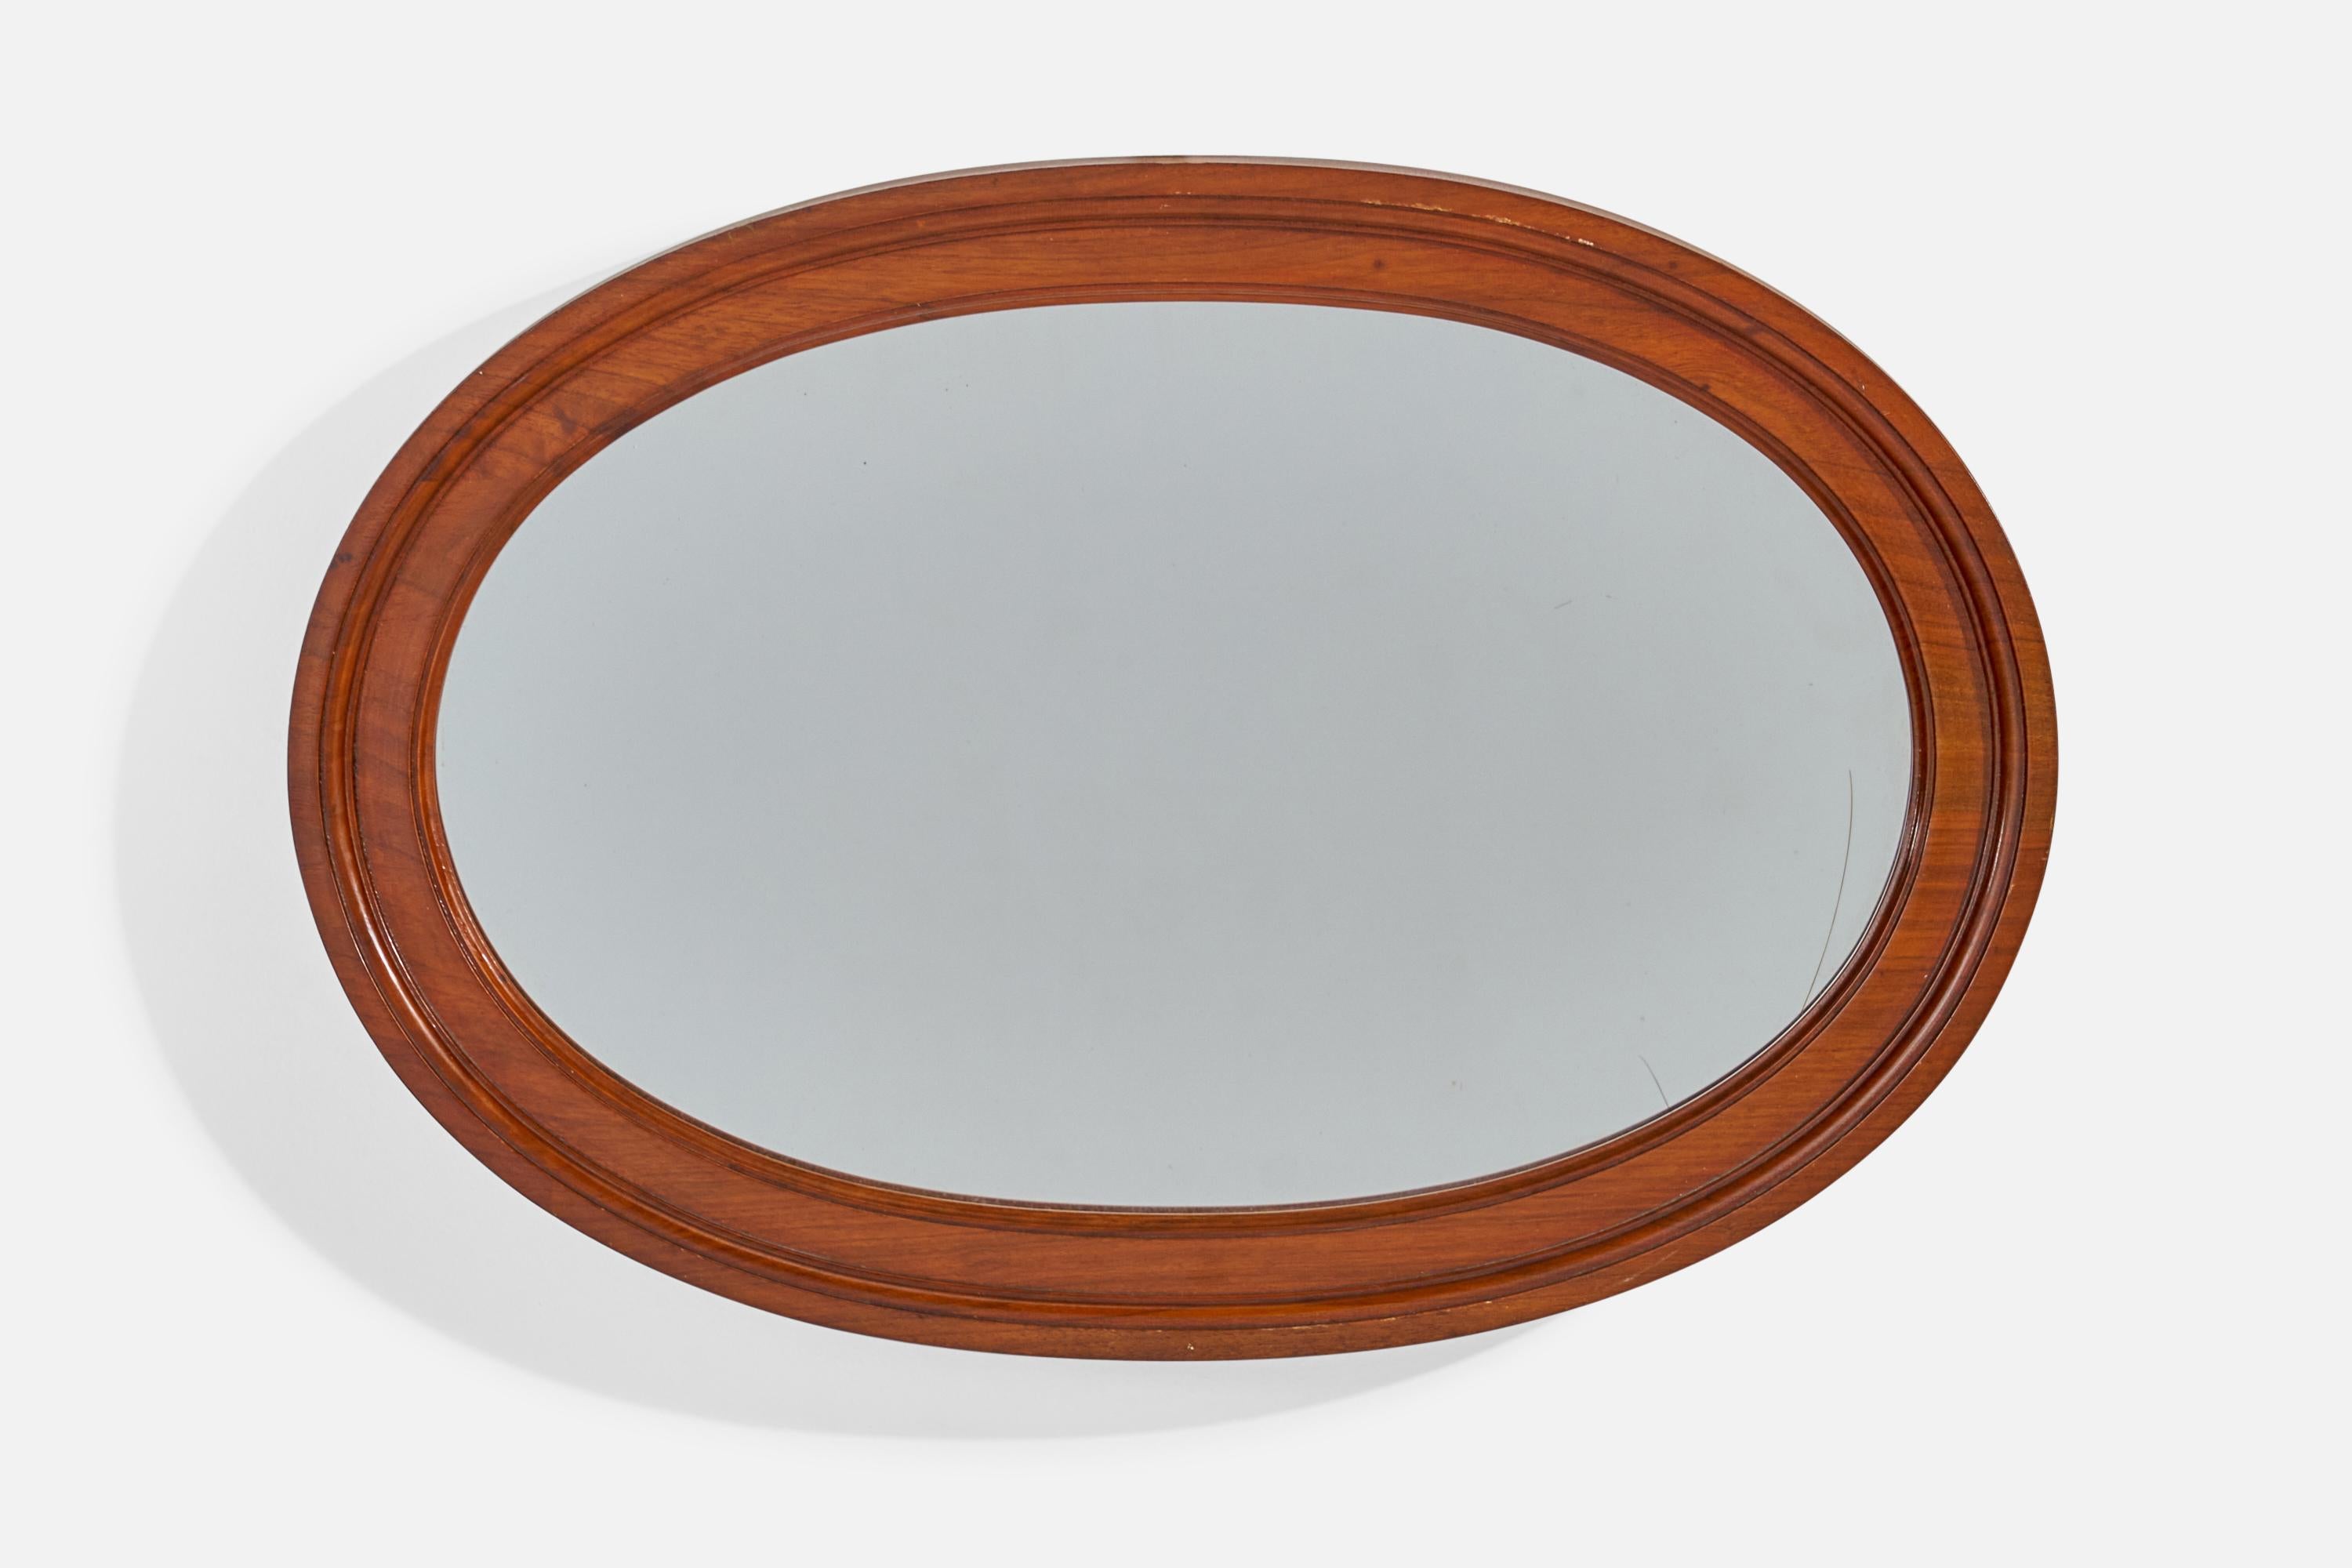 A walnut wall mirror designed and produced in Sweden, c. 1930s.